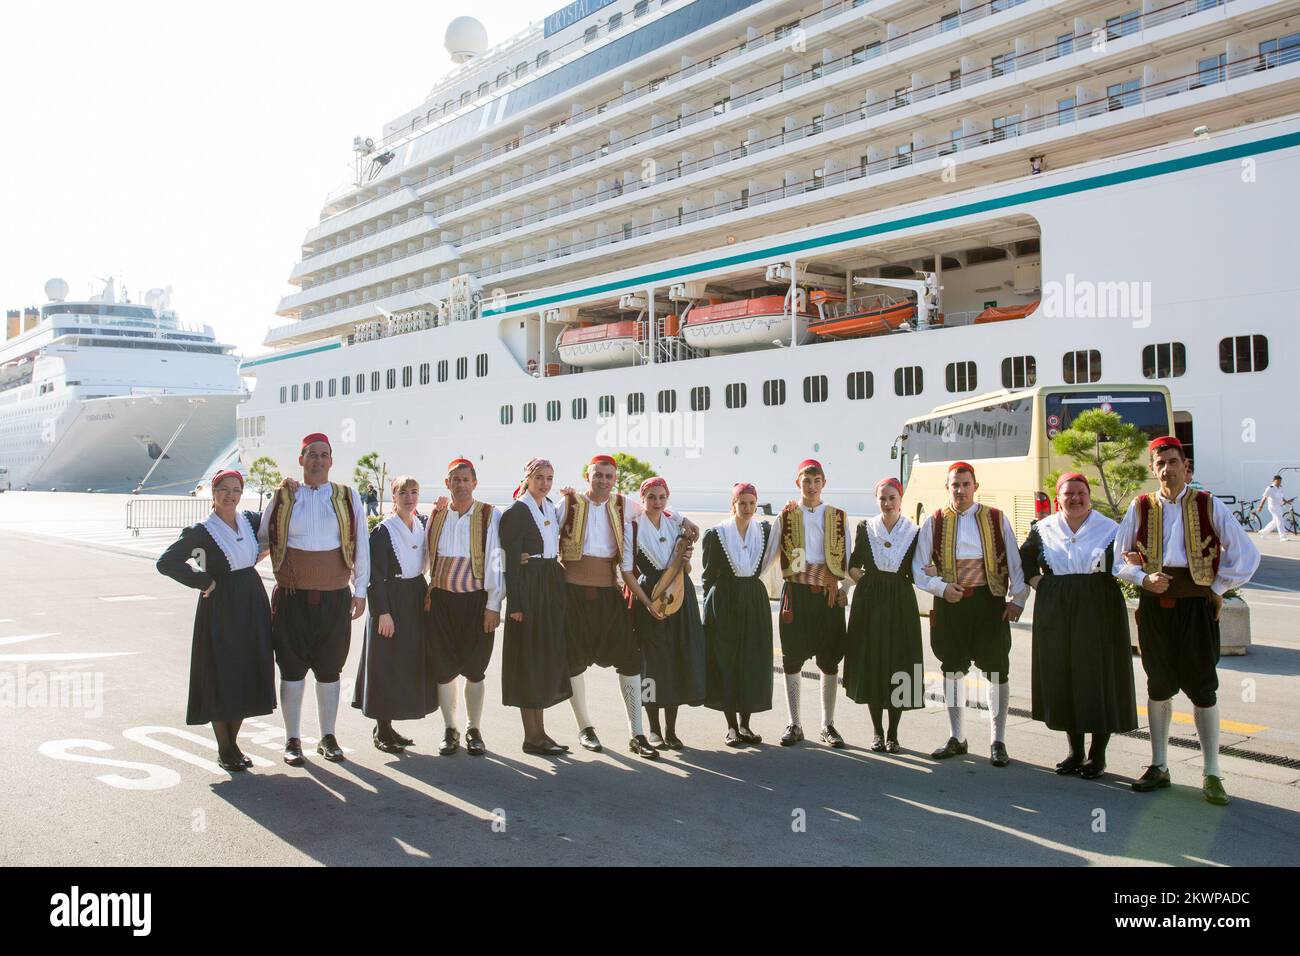 28.10.2013., Dubrovnik, Croatia - Estela Biaggi is the millionth passenger who arrived in Dubrovnik with cruiser. This is her fifth or sixth visit to the city. She said she's very happy and that she didn't expect this kind of welcome. She came to Dubrovnik with cruiser Costa Classica.  Photo: Grgo Jelavic/PIXSELL Stock Photo